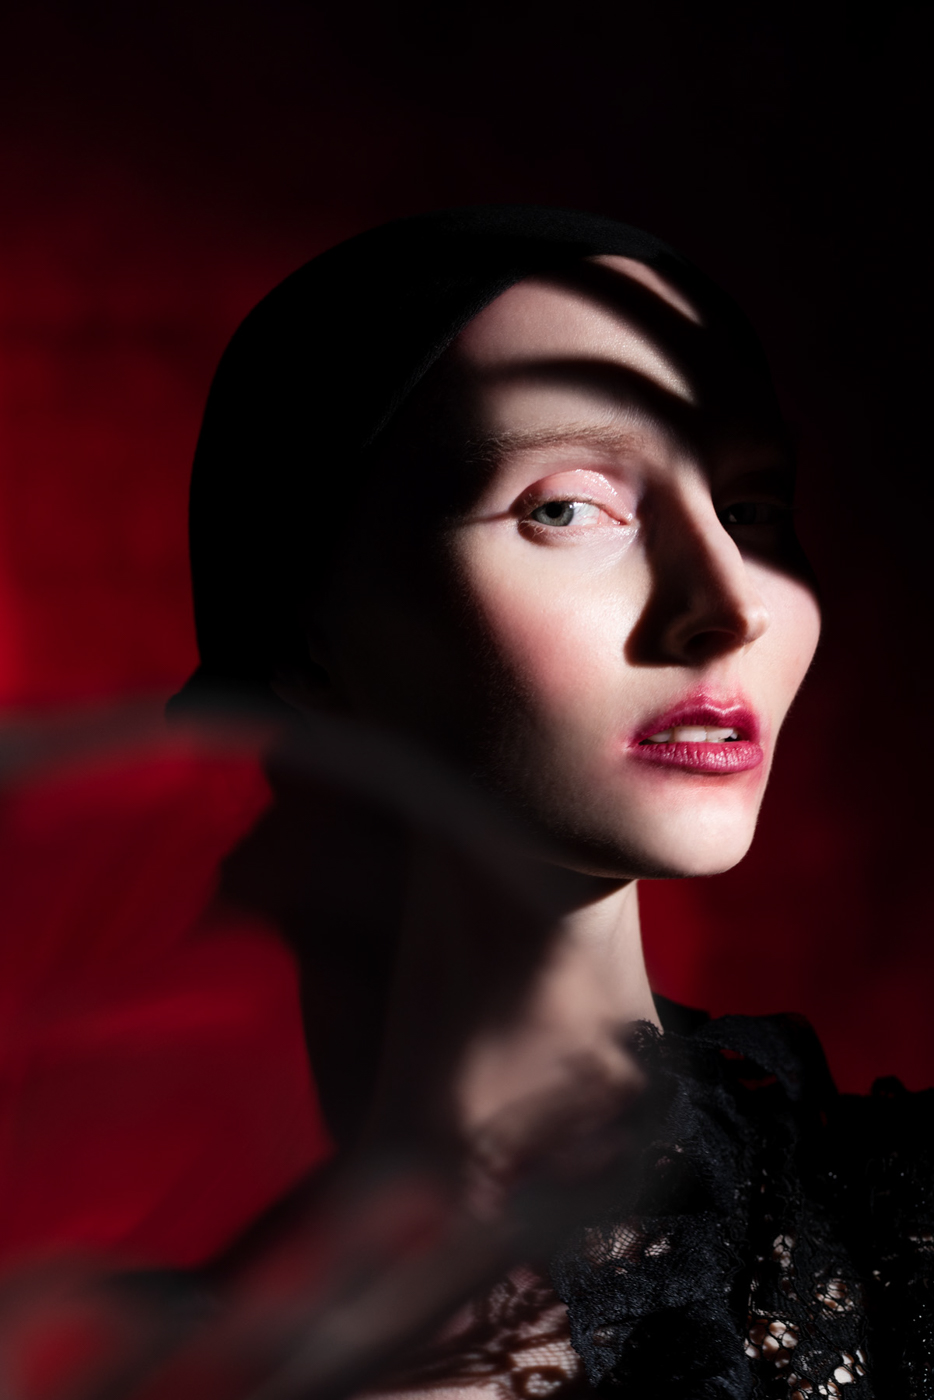 Dramatic_distorted_dreamy_beauty_editorial_portrait_of_woman_with_red_lips_wearing_black_lace_on_red_background_photographed_by_Sara_Lehtomaa